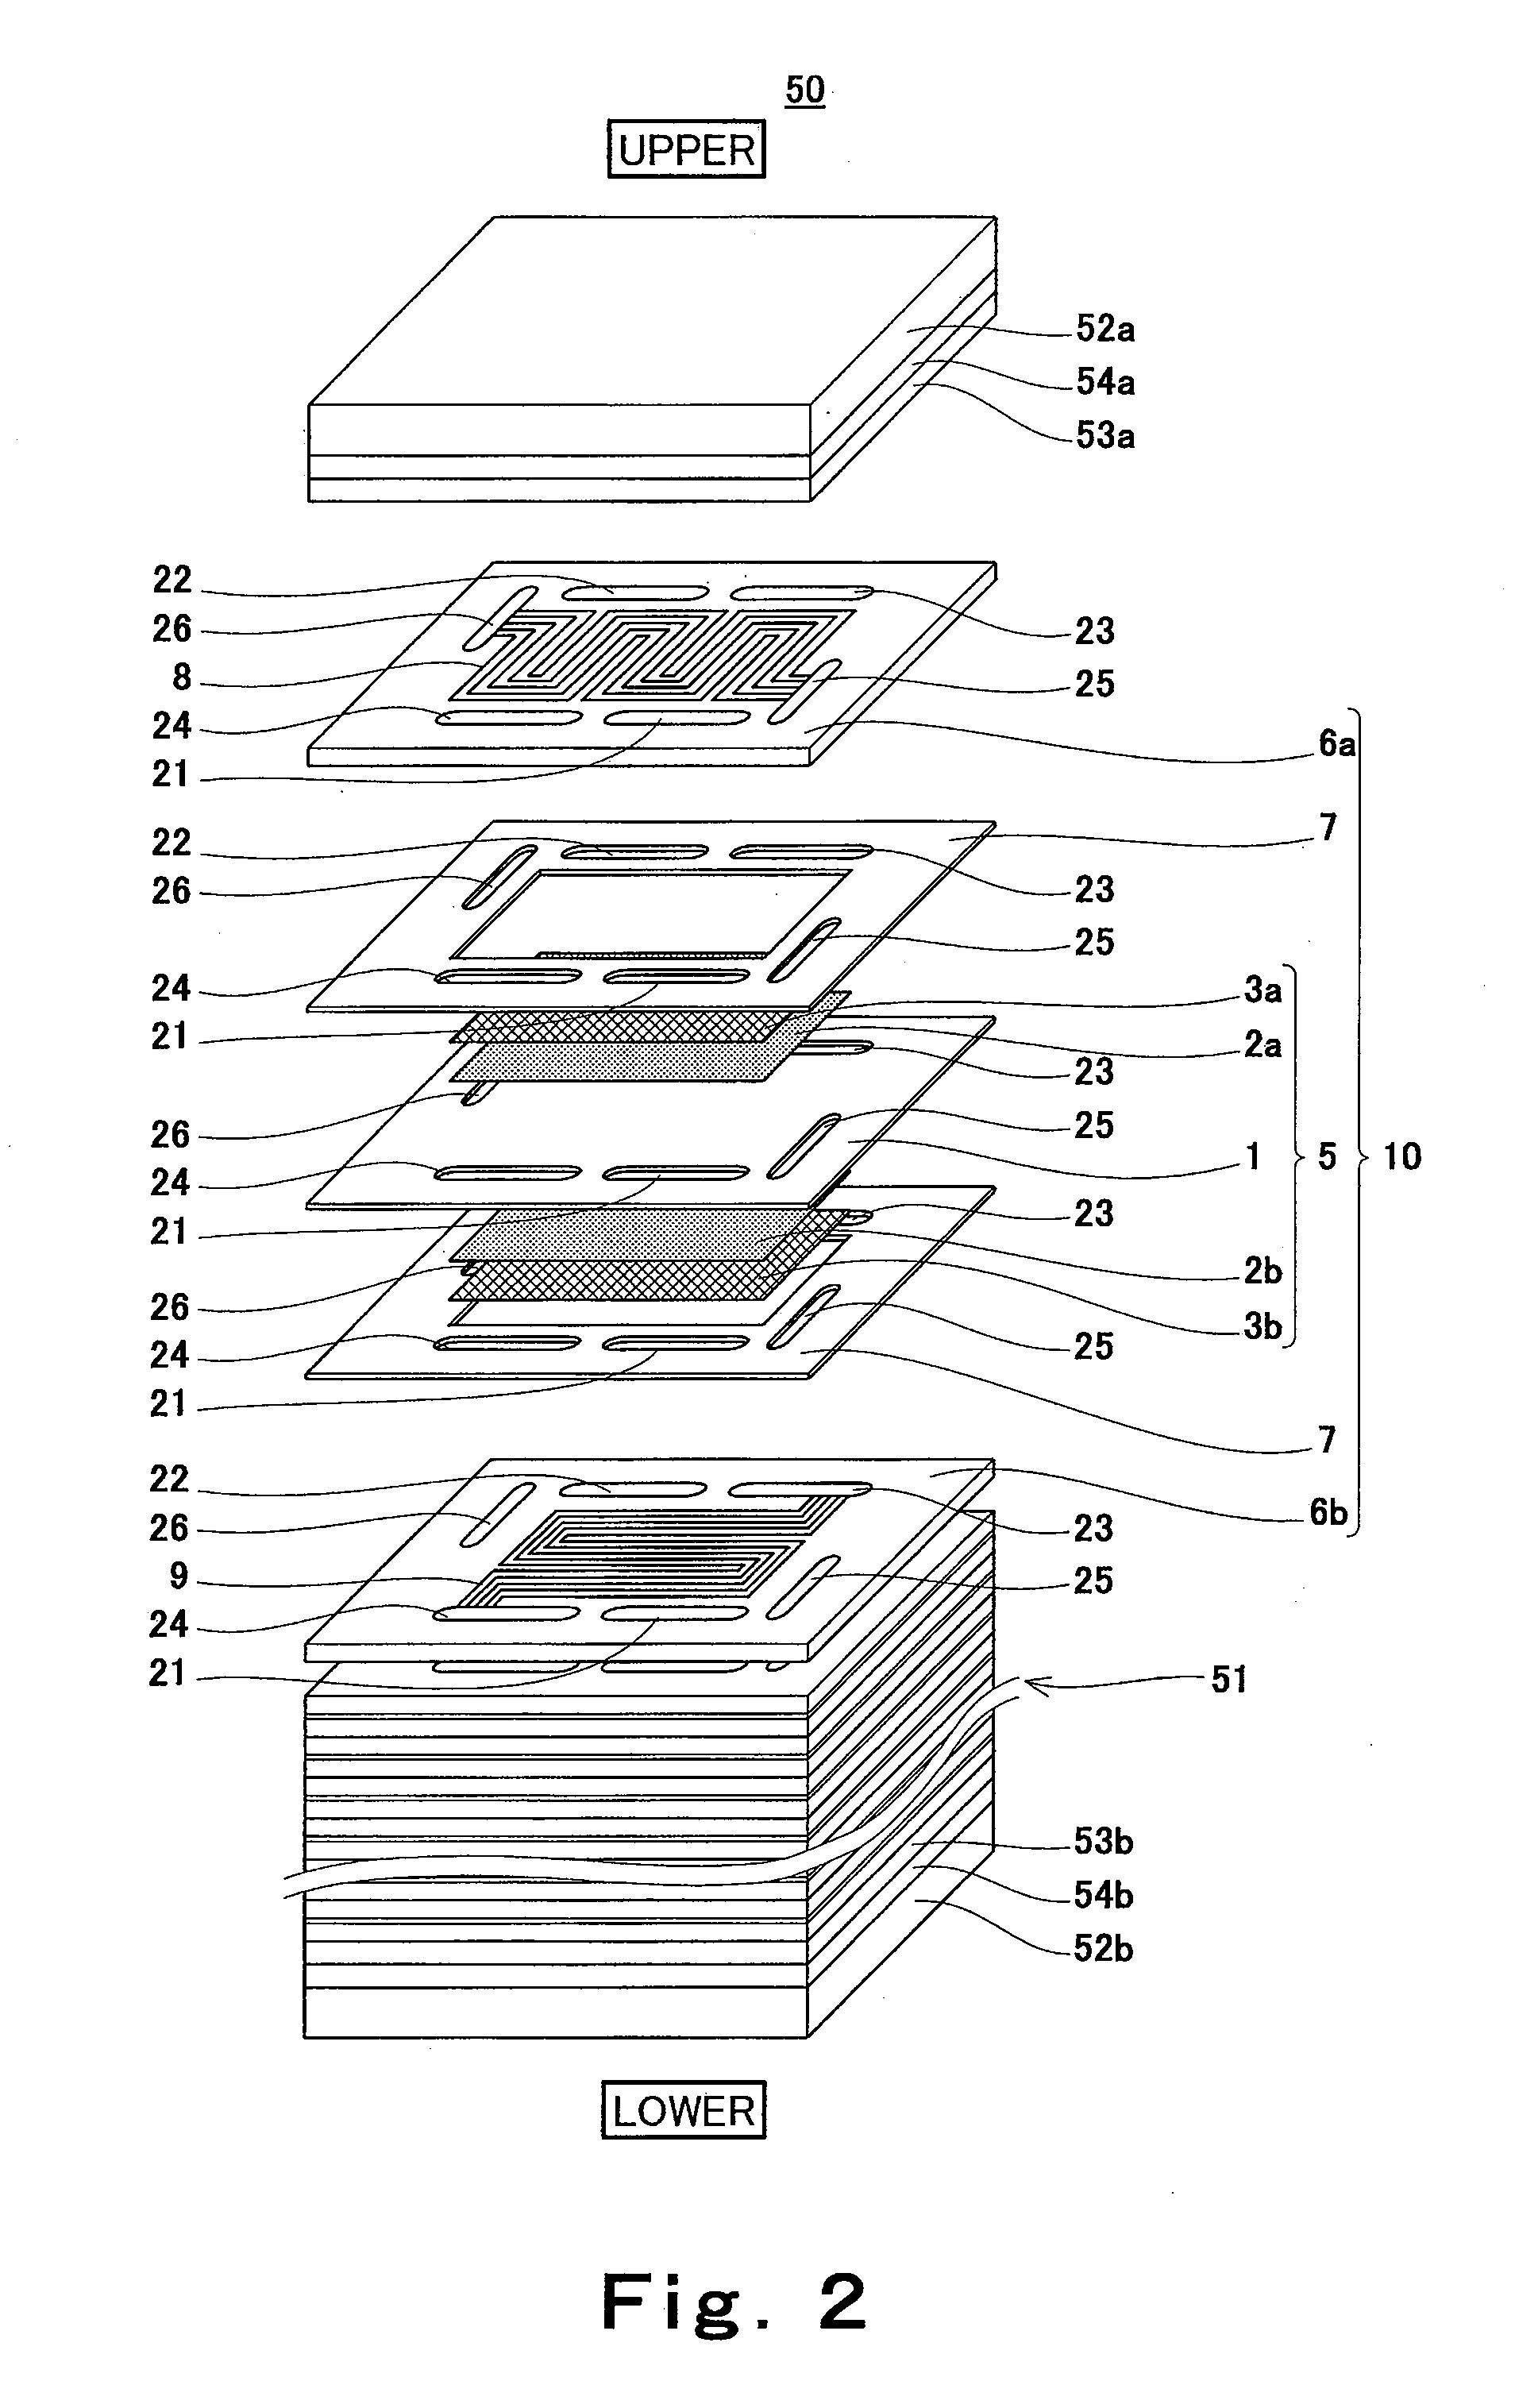 Polymer electrolyte fuel cell and method for measuring voltages of cells in polymer electrolyte fuel cell